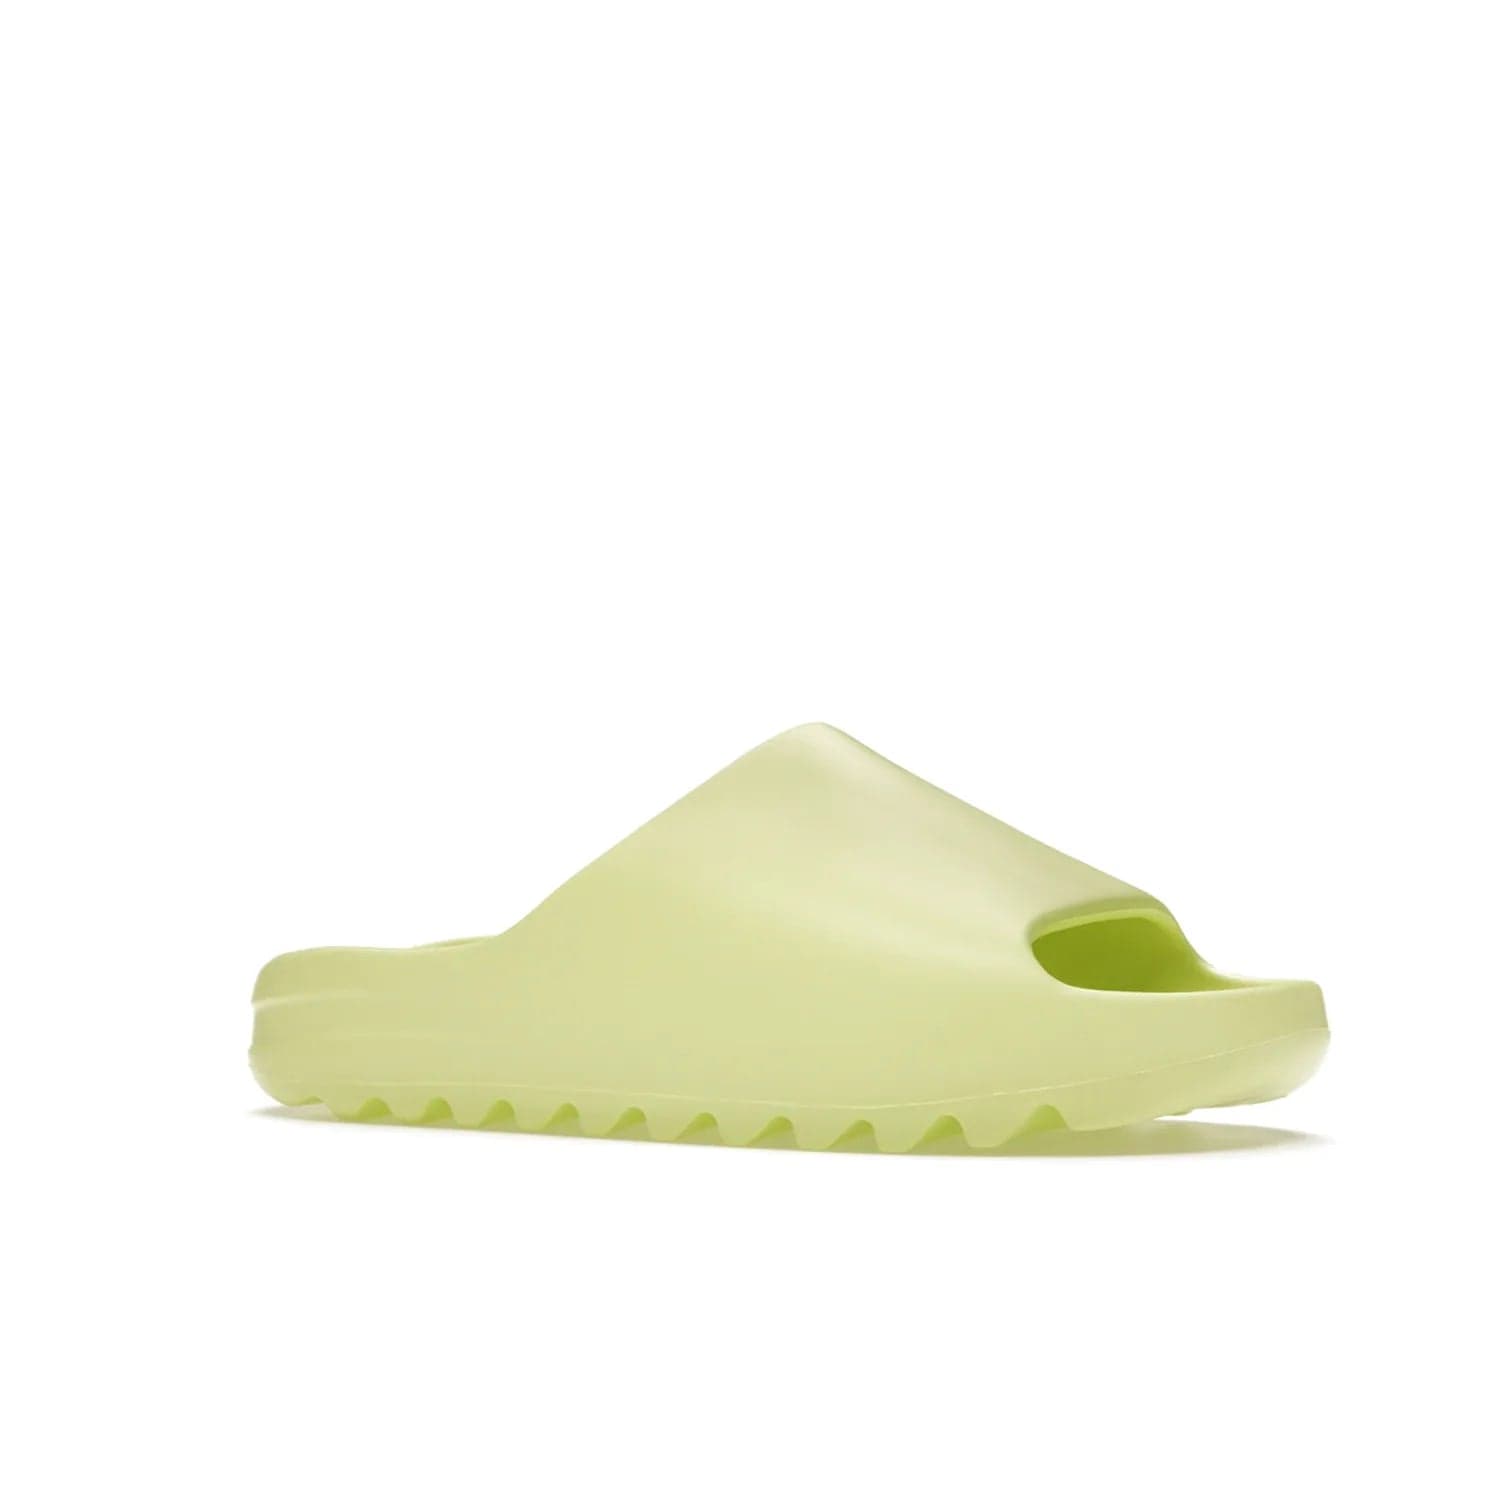 adidas Yeezy Slide Glow Green - Image 4 - Only at www.BallersClubKickz.com - Experience an unexpected summer style with the adidas Yeezy Slide Glow Green. This limited edition slide sandal provides a lightweight and durable construction and a bold Glow Green hue. Strategic grooves enhance traction and provide all-day comfort. Make a statement with the adidas Yeezy Slide Glow Green.